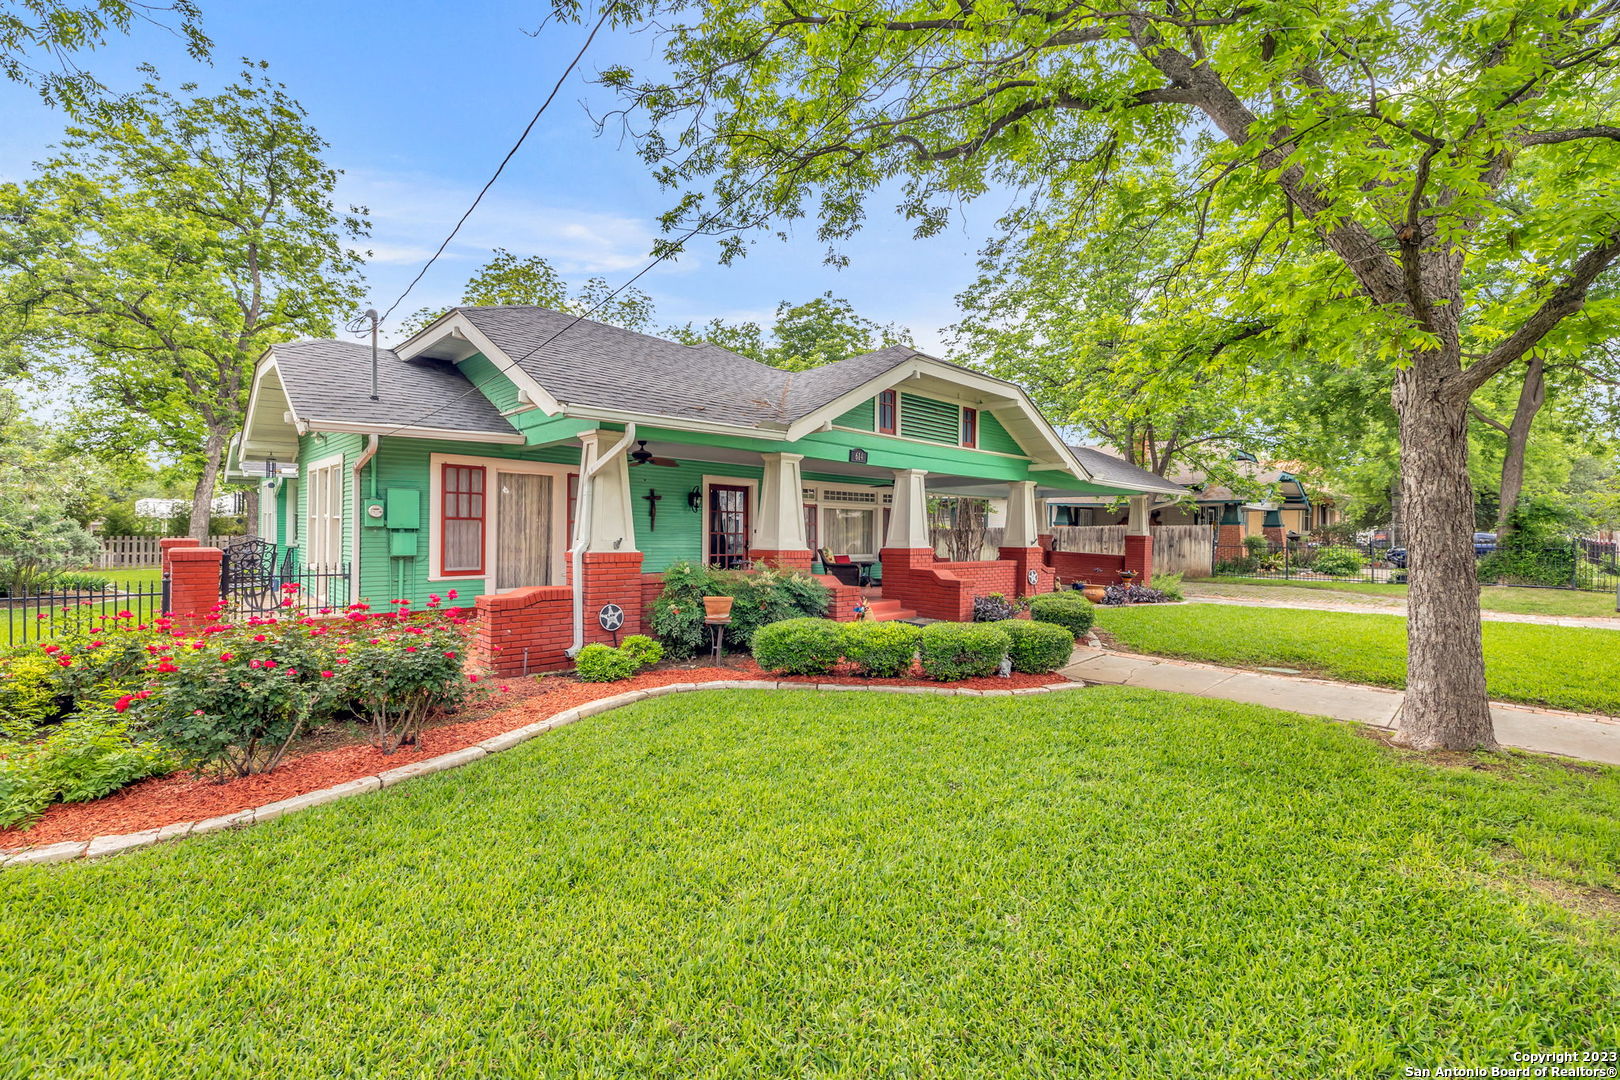 This stunning single-story Craftsman style home is located in the heart of San Antonio, just steps away from all of the city's top attractions, including the Pearl Brewery and the Museum Reach section of the Riverwalk. This home in the Tobin Hill Historic District boasts plenty of charm and character, from its original hardwood floors and wood trim to its custom built-ins and unique architectural features.  As you enter the home from the incredible front patio and step inside, you'll be greeted by a spacious living room with a cozy fireplace and plenty of natural light streaming in from the large windows. The adjacent large dining room leads into another large living space and large updated kitchen.  The home is currently set up with two comfortable bedrooms, but has two additional rooms currently used as an office and living space which could easily be used as additional bedrooms.  Outside, this home sits on a huge lot with a detached two-car garage that has previously been used as a separate apartment. The expansive backyard offers plenty of space for entertaining and gardening, with mature trees providing shade and privacy; the landscaping at this home is immaculate!  This is truly a rare find - a historic home with all the charm and modern amenities you need and a location that can't be beat.